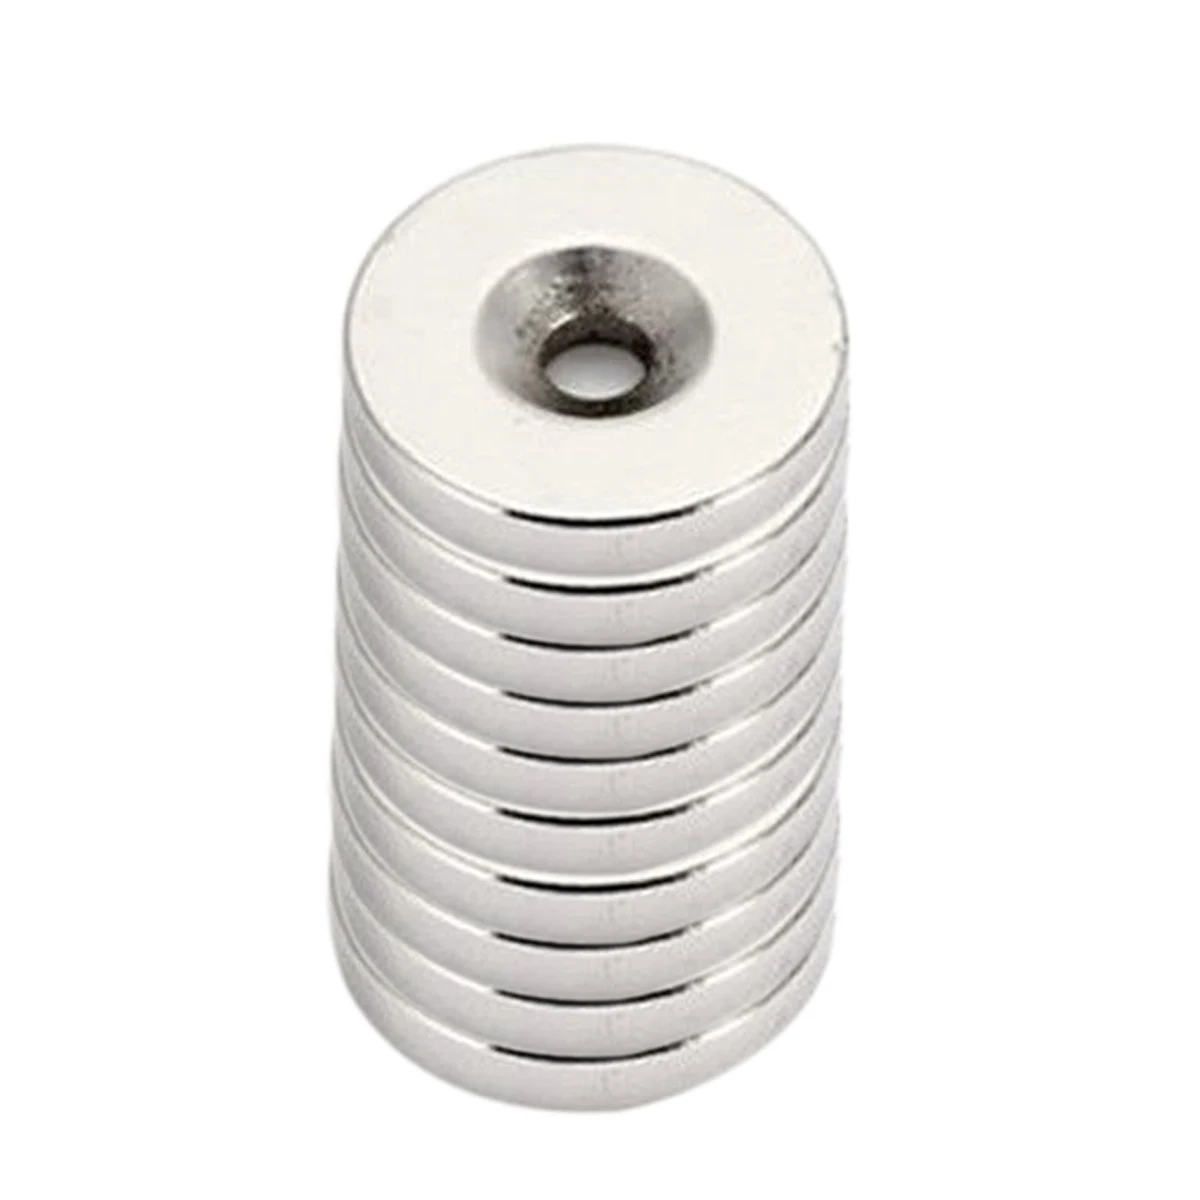 10pcs New 15x3mm N52 NdFeB Neodymium Magnet Strong Round Rare Earth Magnets Disc w/Hole